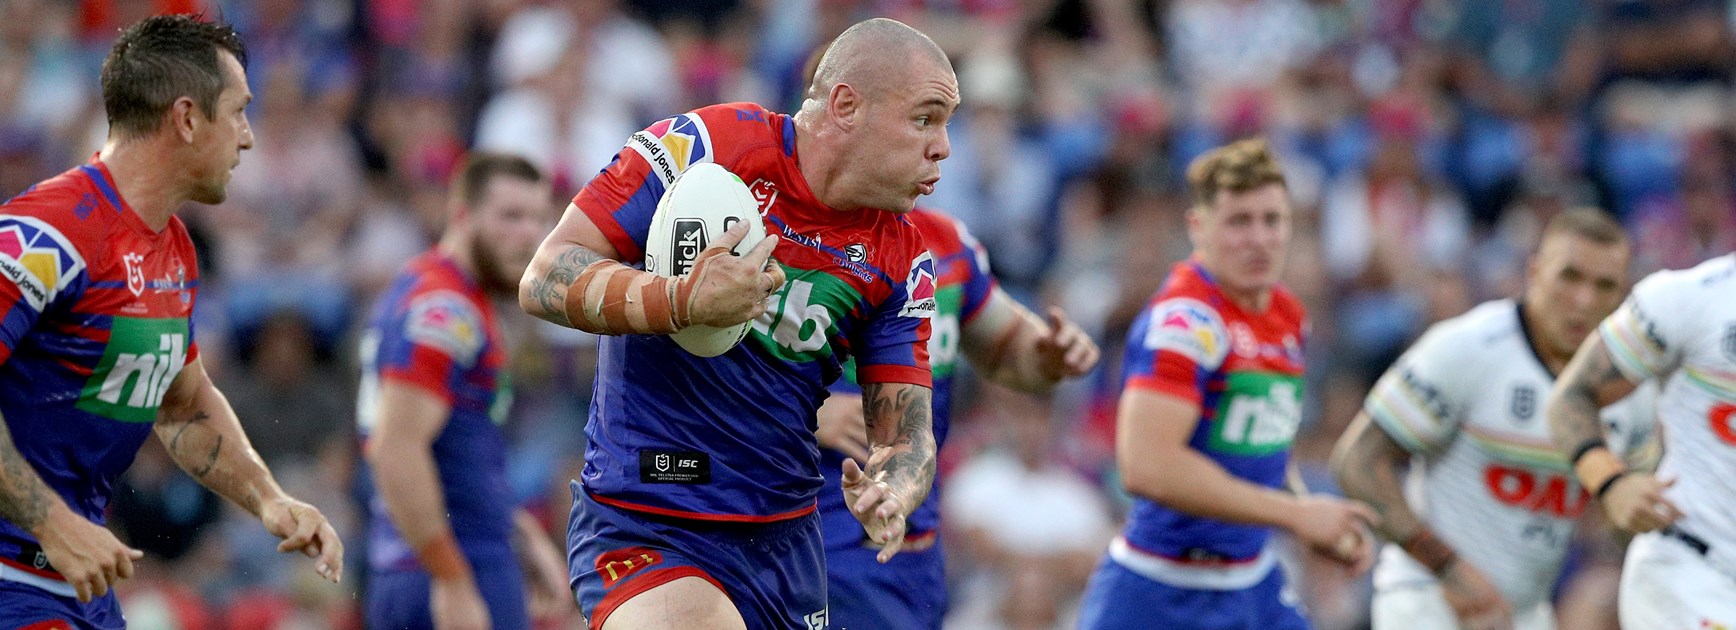 Brown backs Klemmer to fire against old club